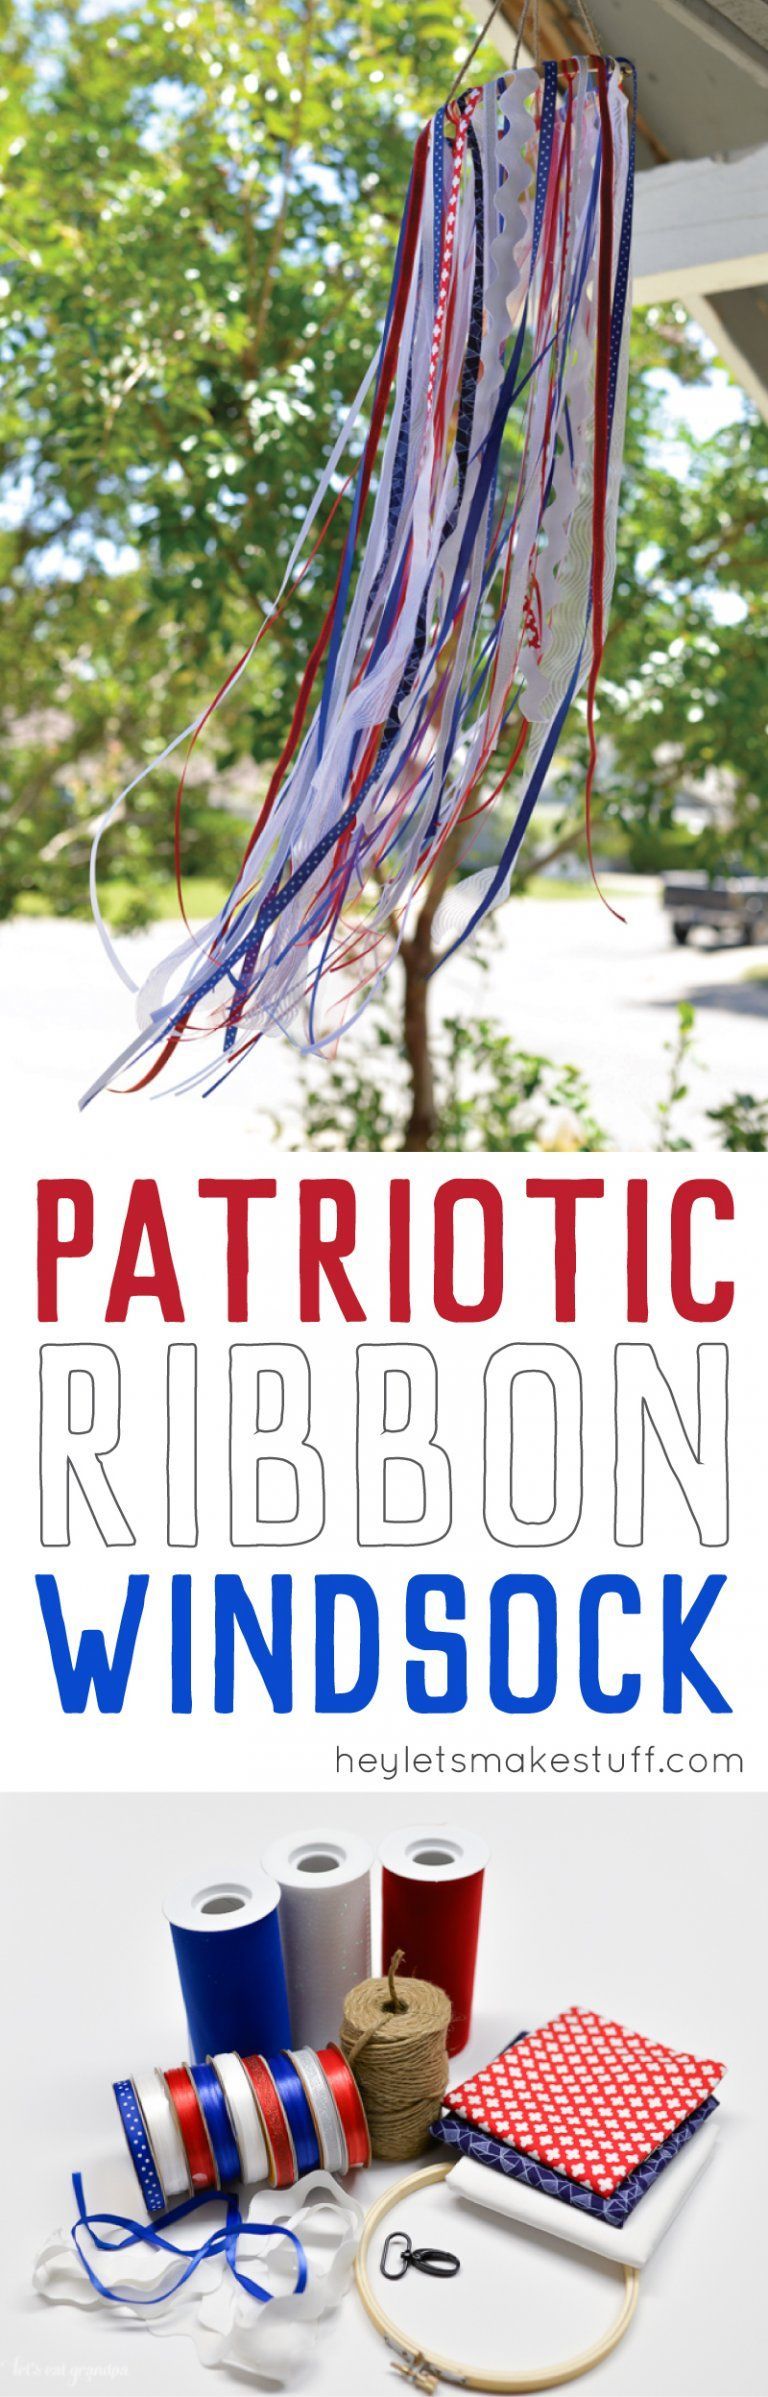 Use ribbon and other scraps to make this patriotic windsock! Its the perfect outdoor decor for the 4th of July and Memorial Day. A